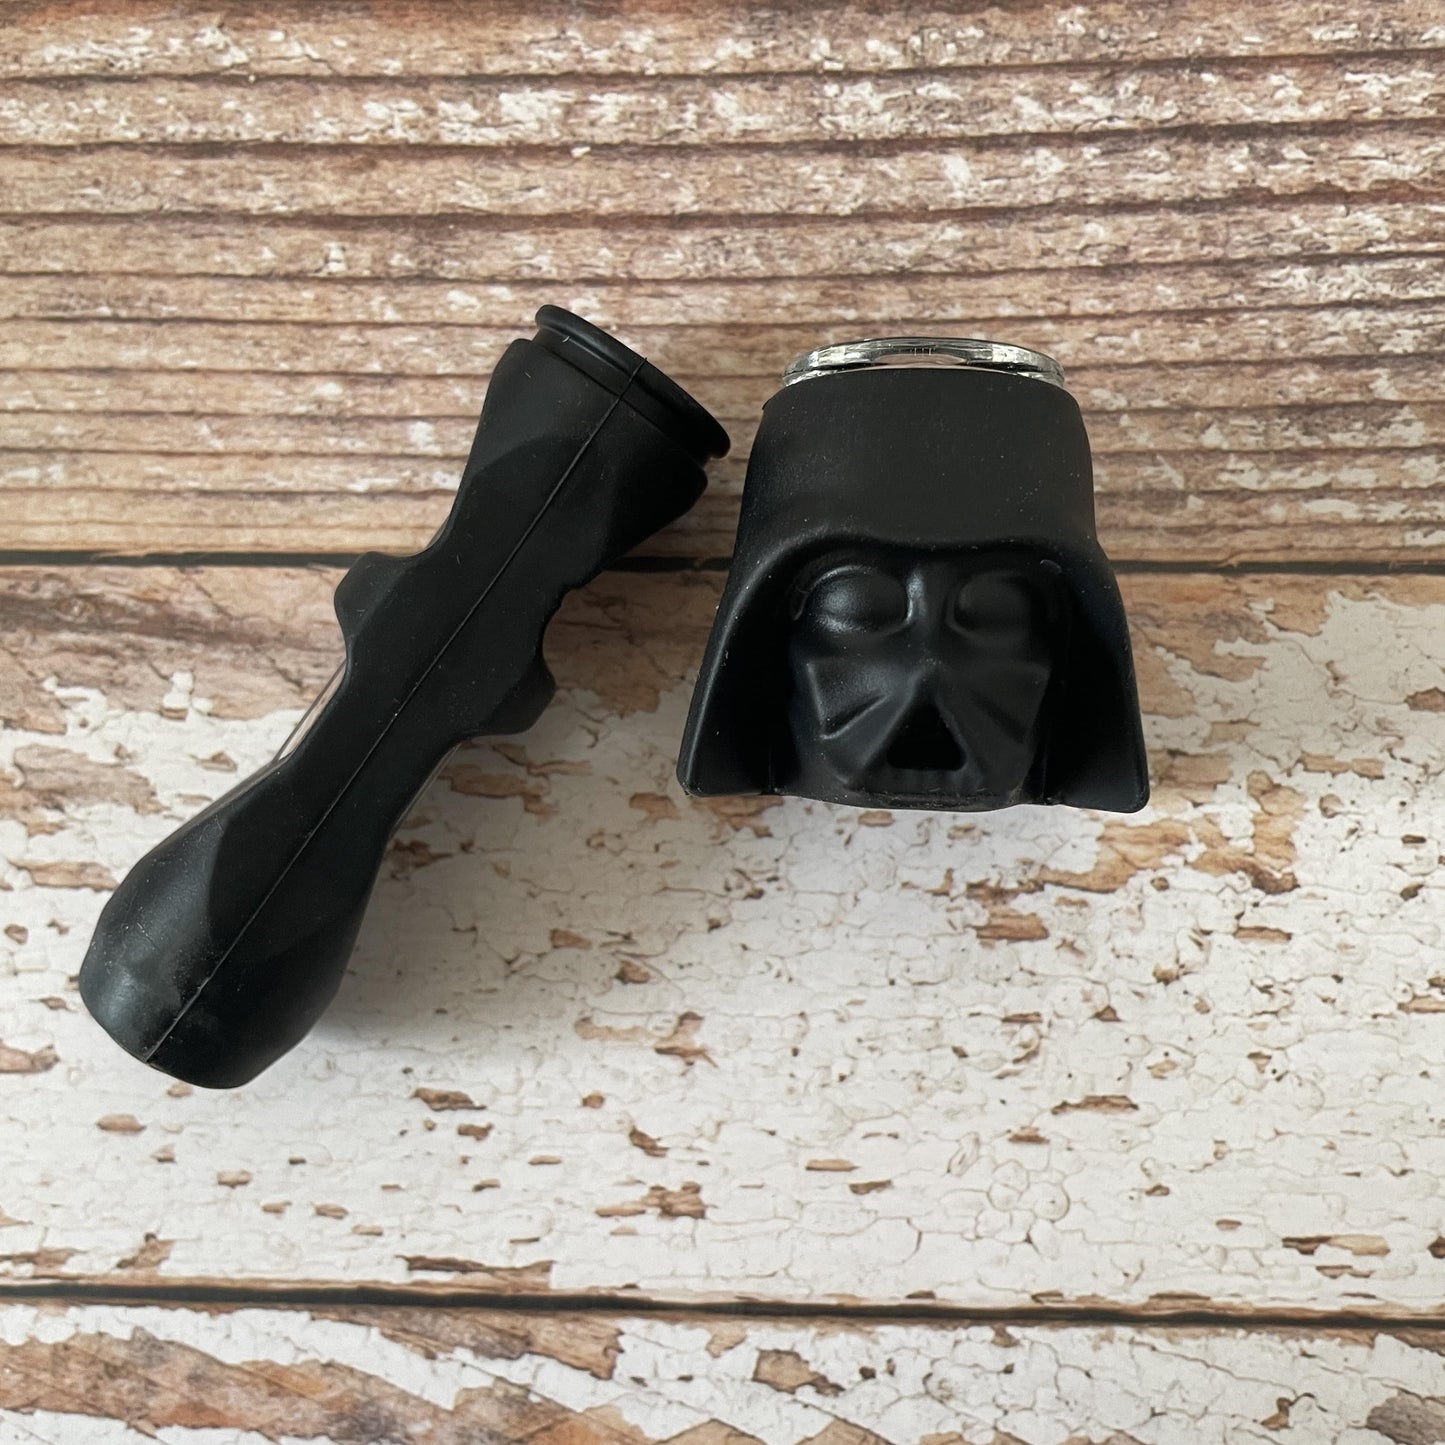 Star wars themed pipe and ashtray